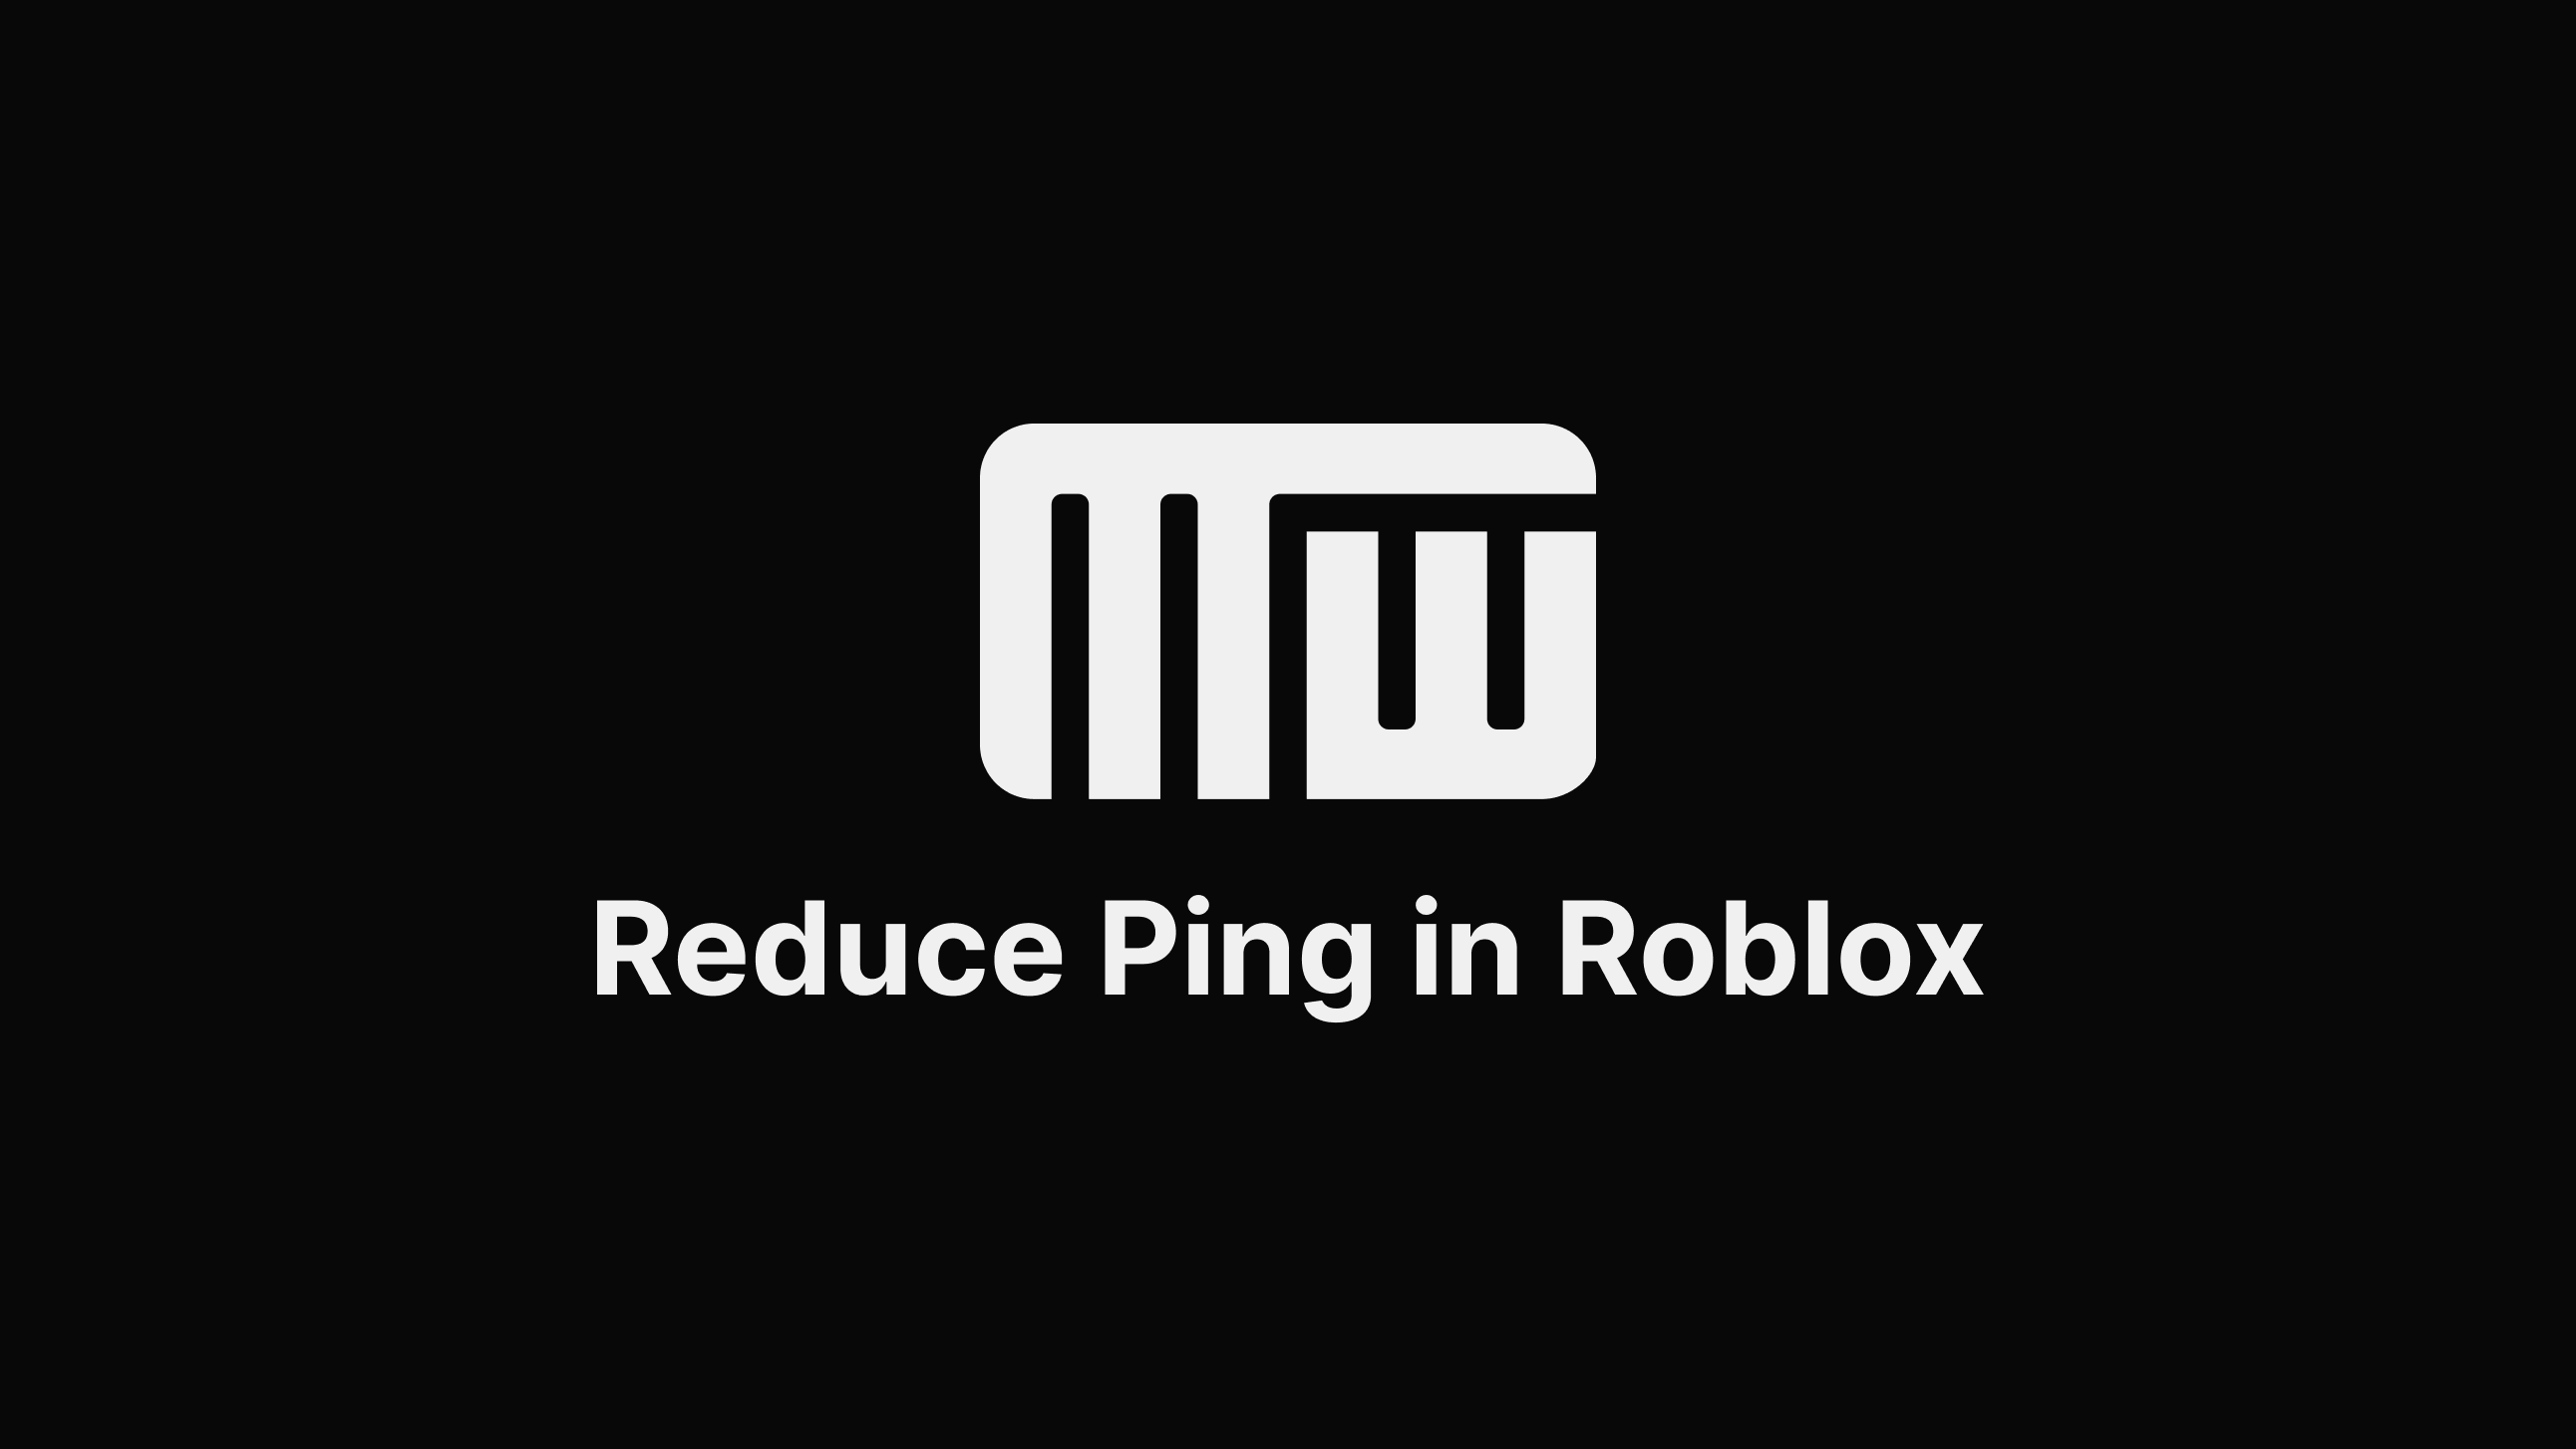 Reduce Ping in Roblox